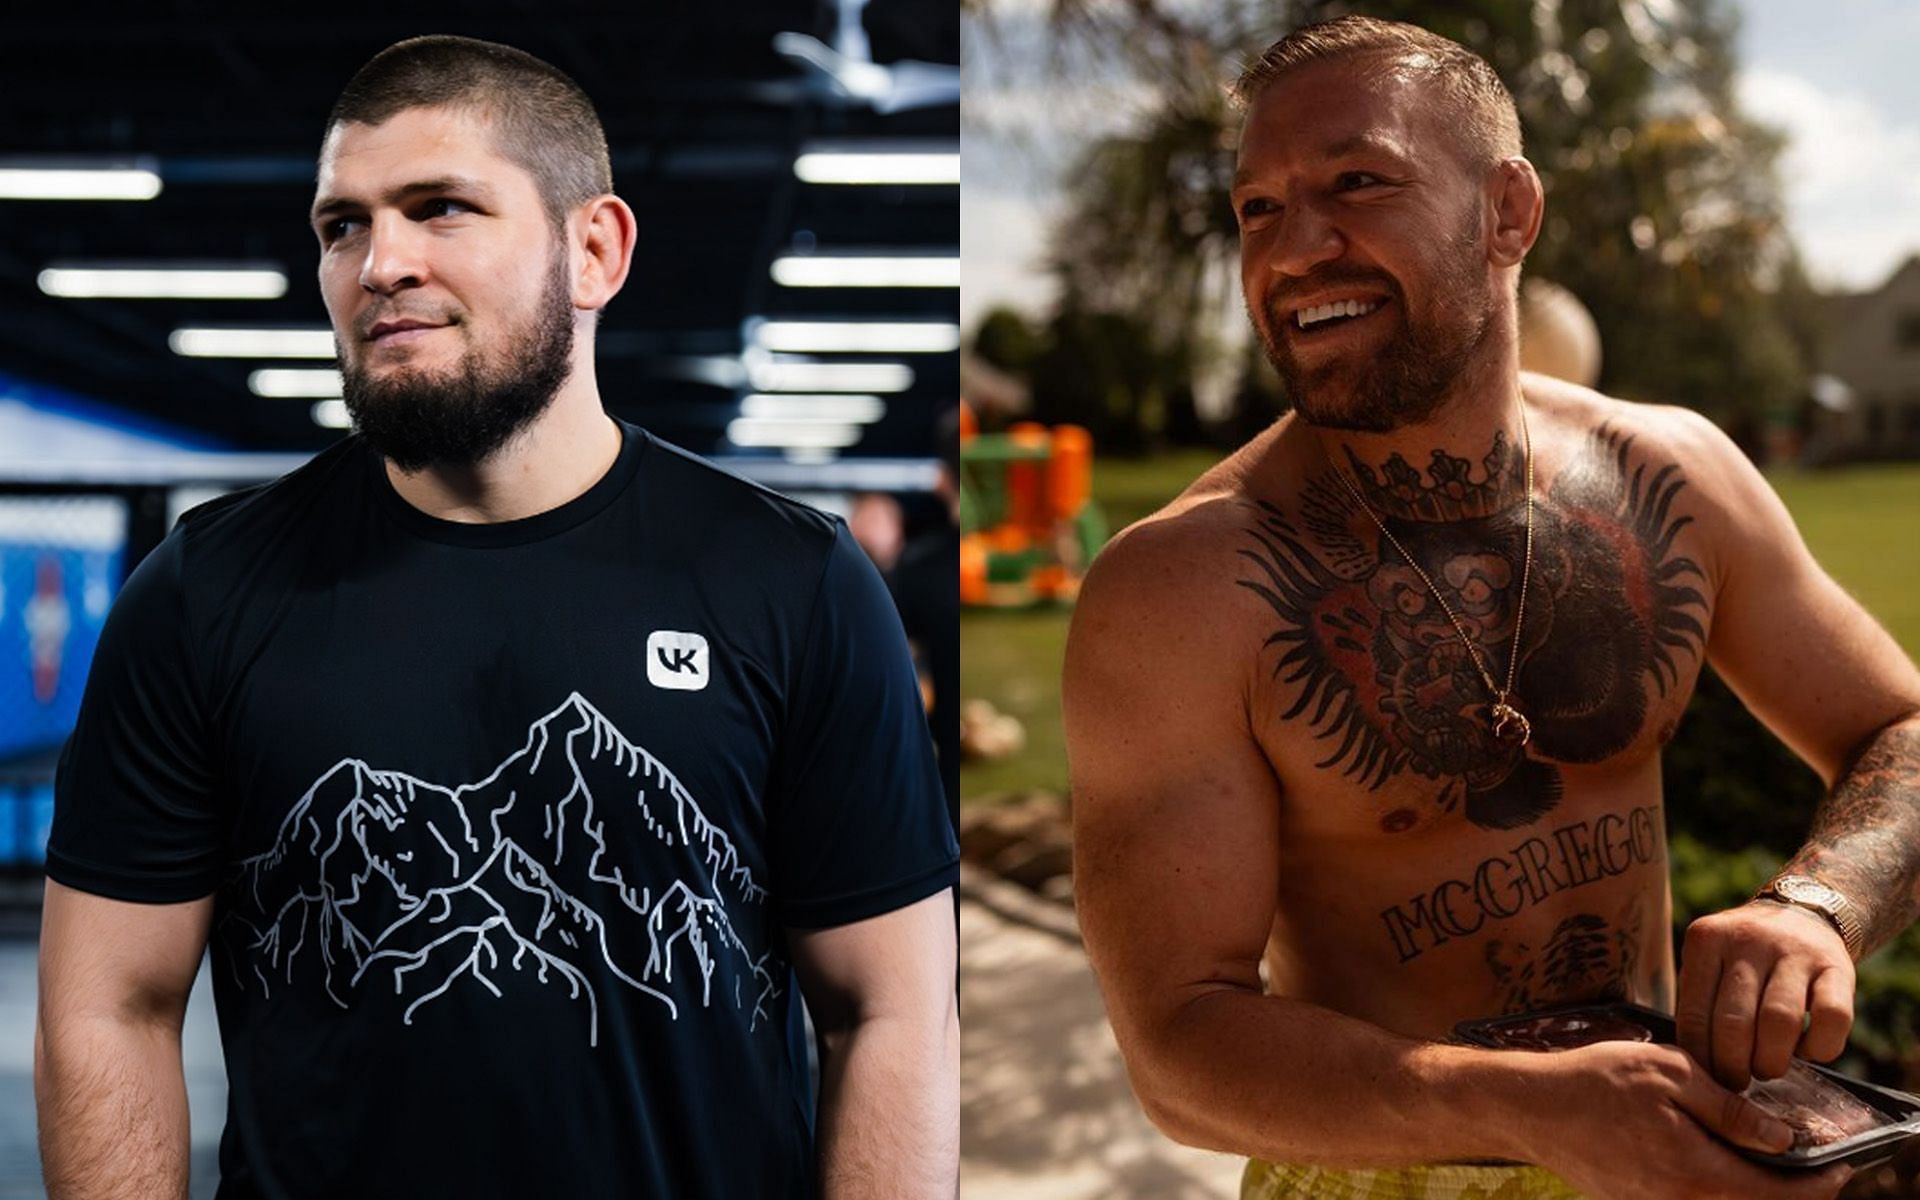 Khabib Nurmagomedov (left) was brutally trolled by Conor McGregor (right) in light of his alleged troubles with the Russian Government. [Images courtesy: @khabib_nurmagomedov and @thenotoriousmma on Instagram]